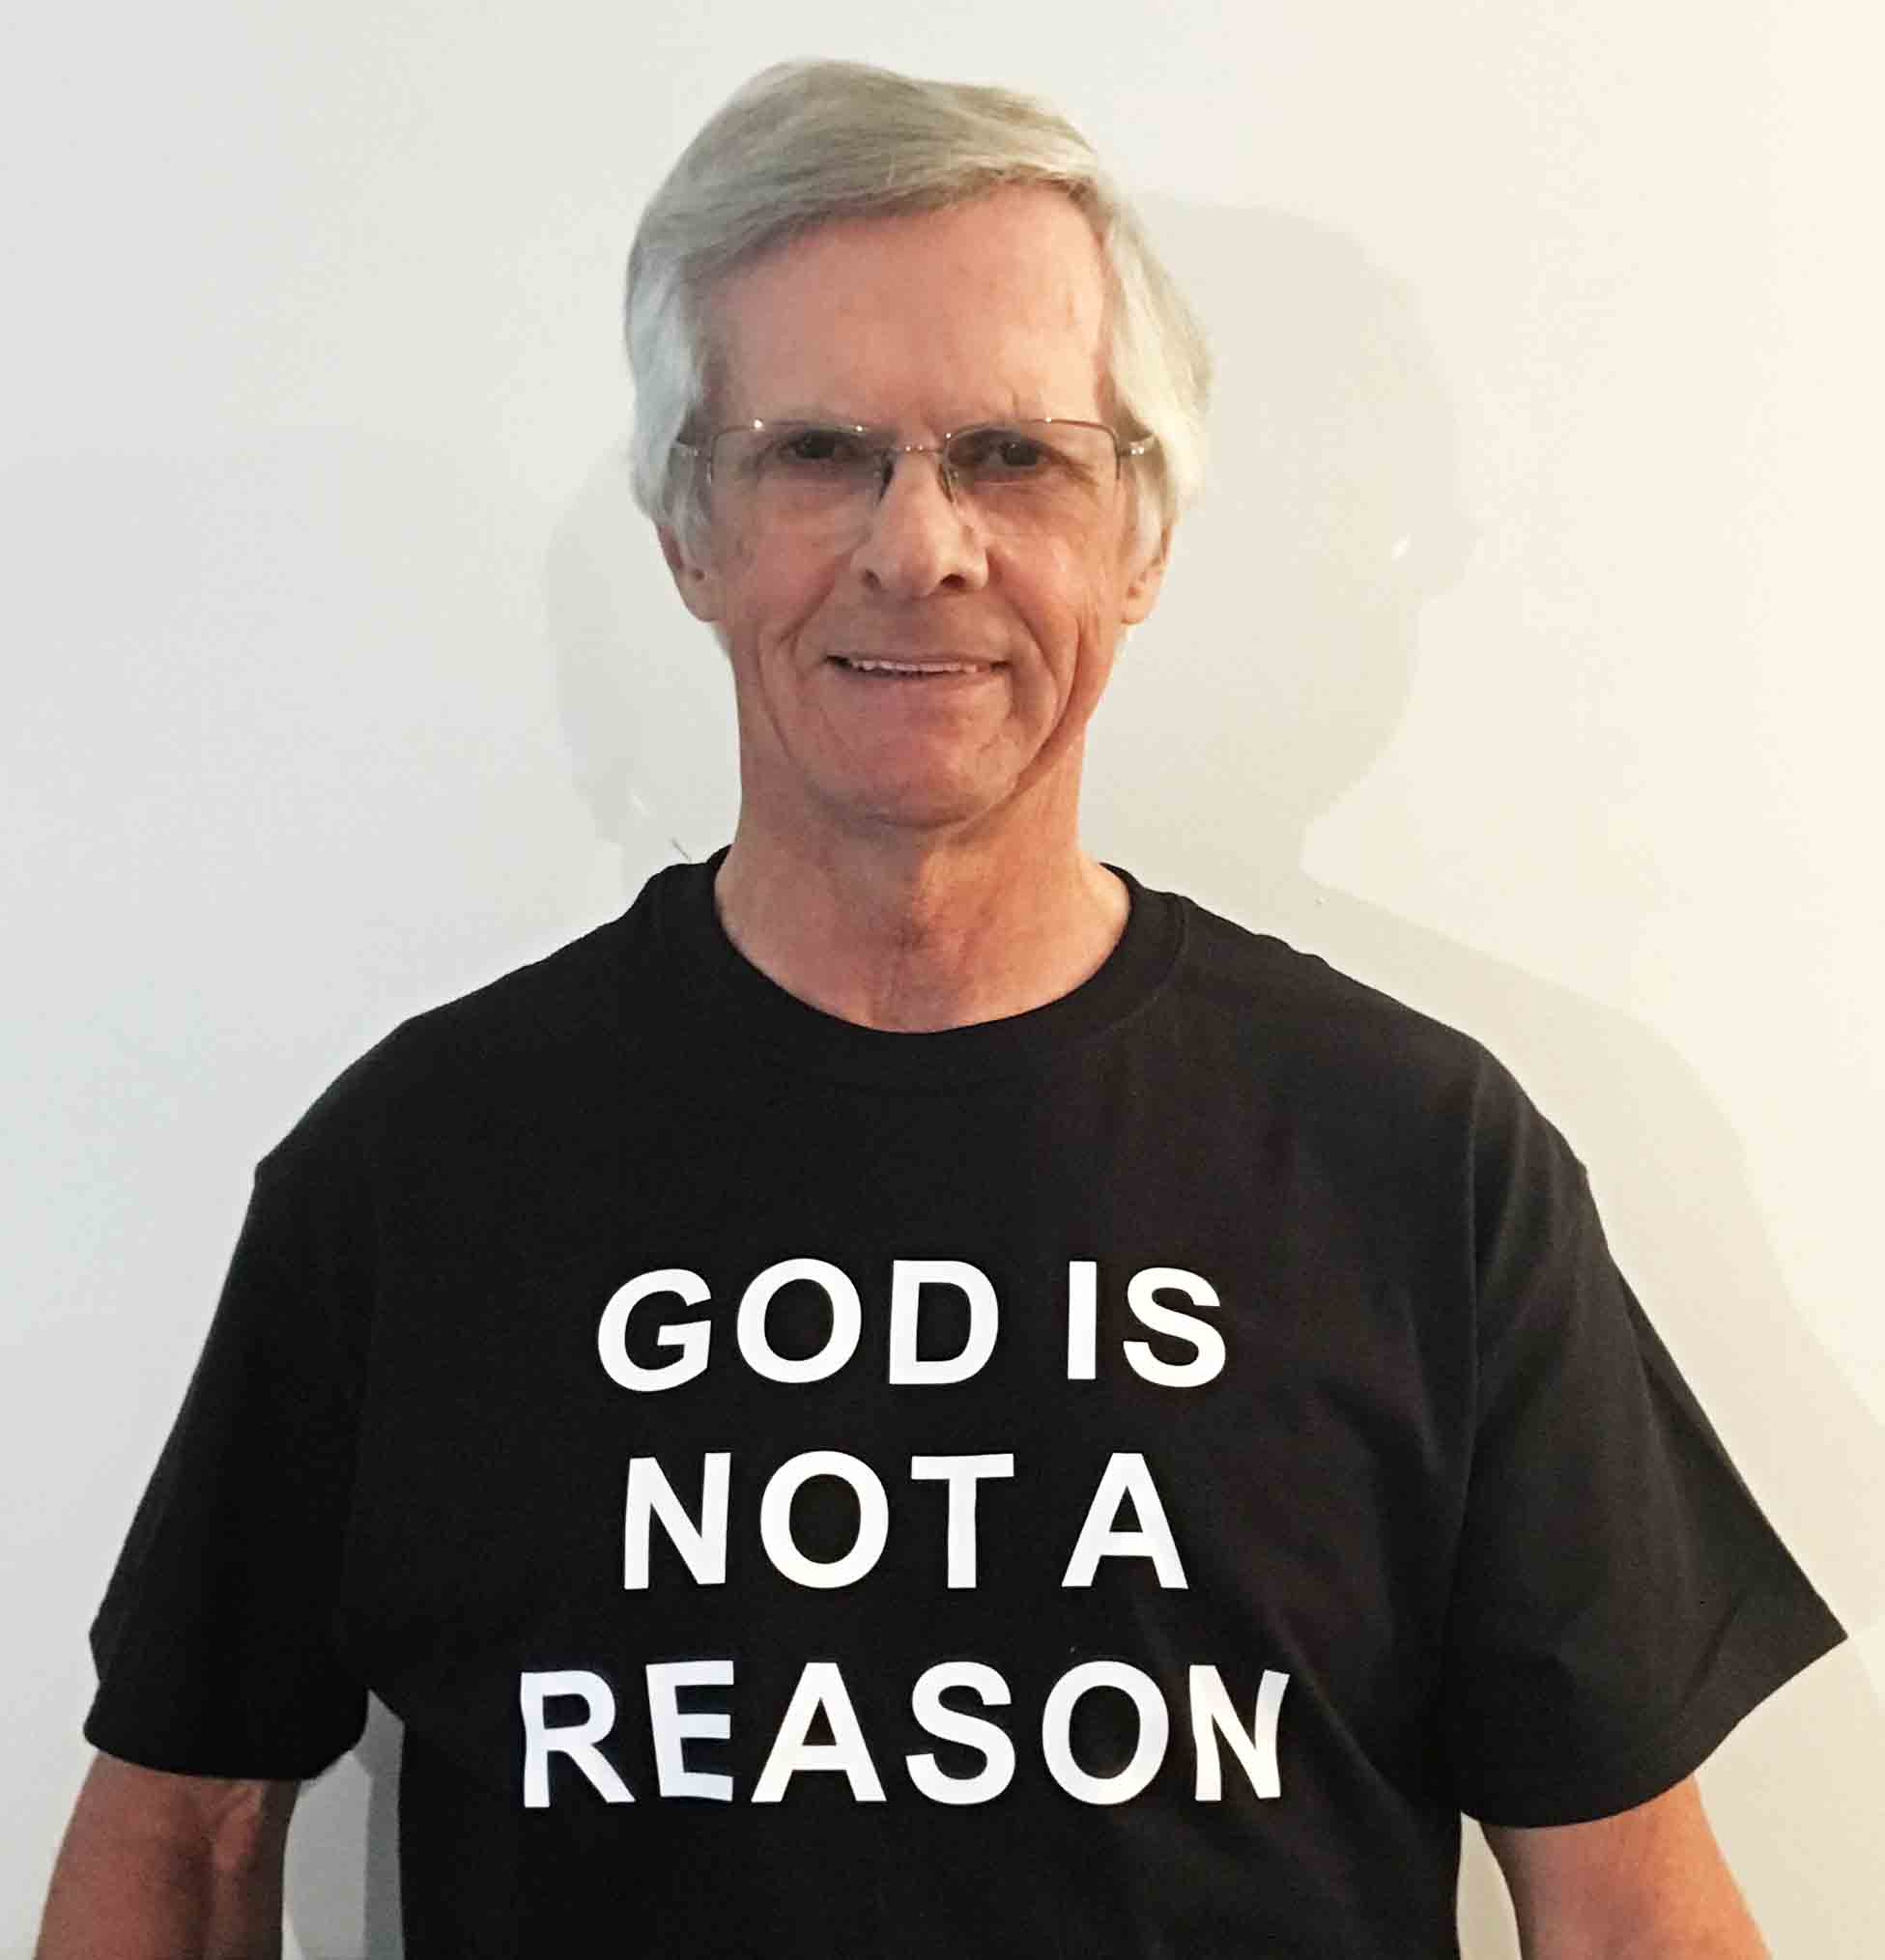 Darwin Bedford wearing his shirt that says 'GOD IS NOT A REASON'